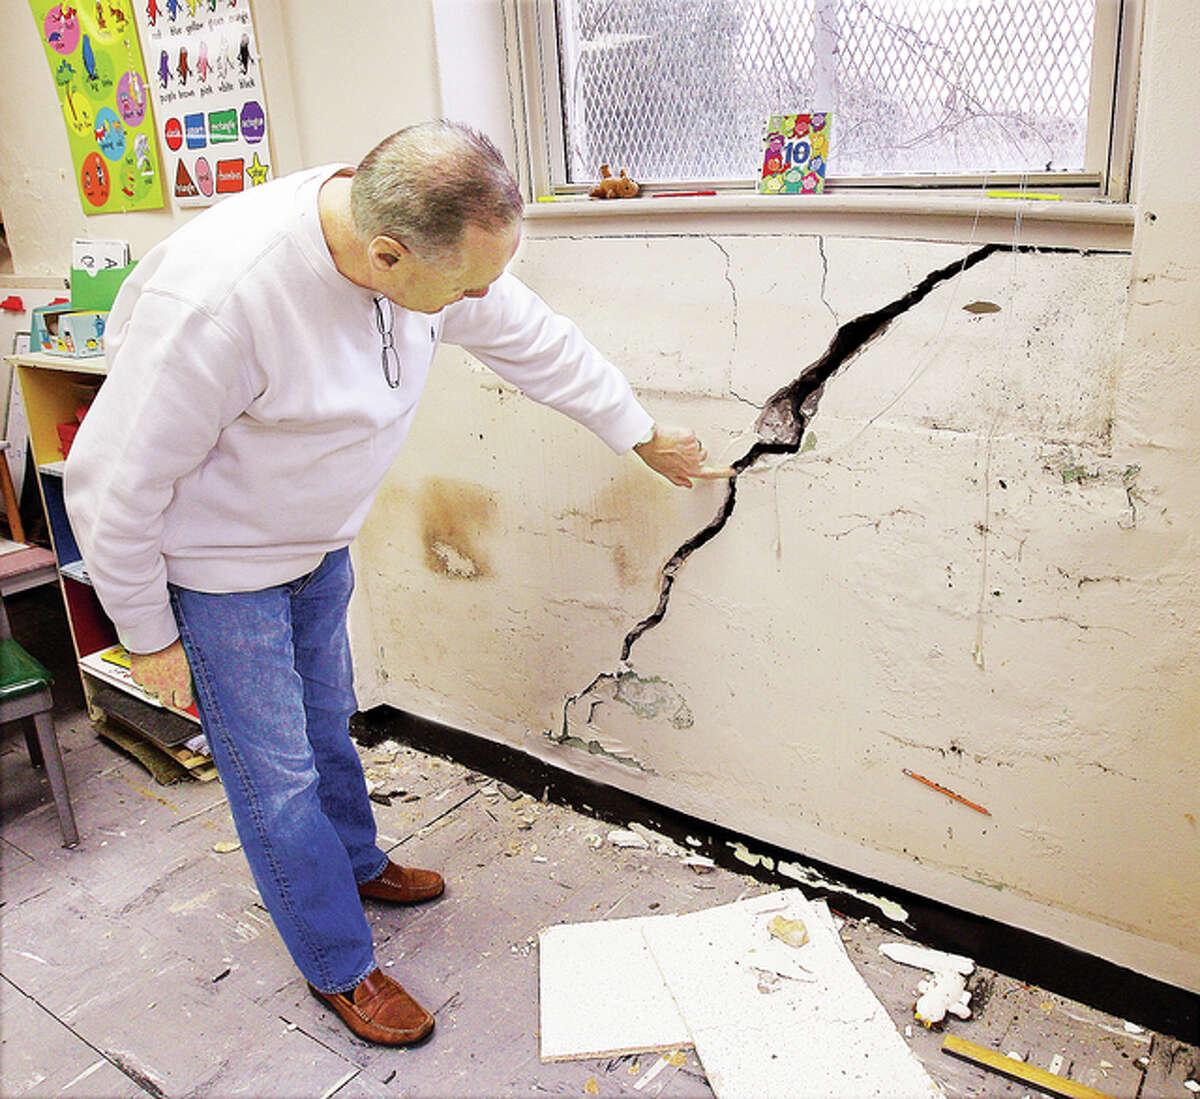 Ss Peter & Paul School principal Harry Cavanaugh in December examines a giant crack in the basement wall of the State Street school building. The school is settled in at the Mark Twain School on Milton Road, but Cavanaugh said they expect to be back in the old building for the next school year.